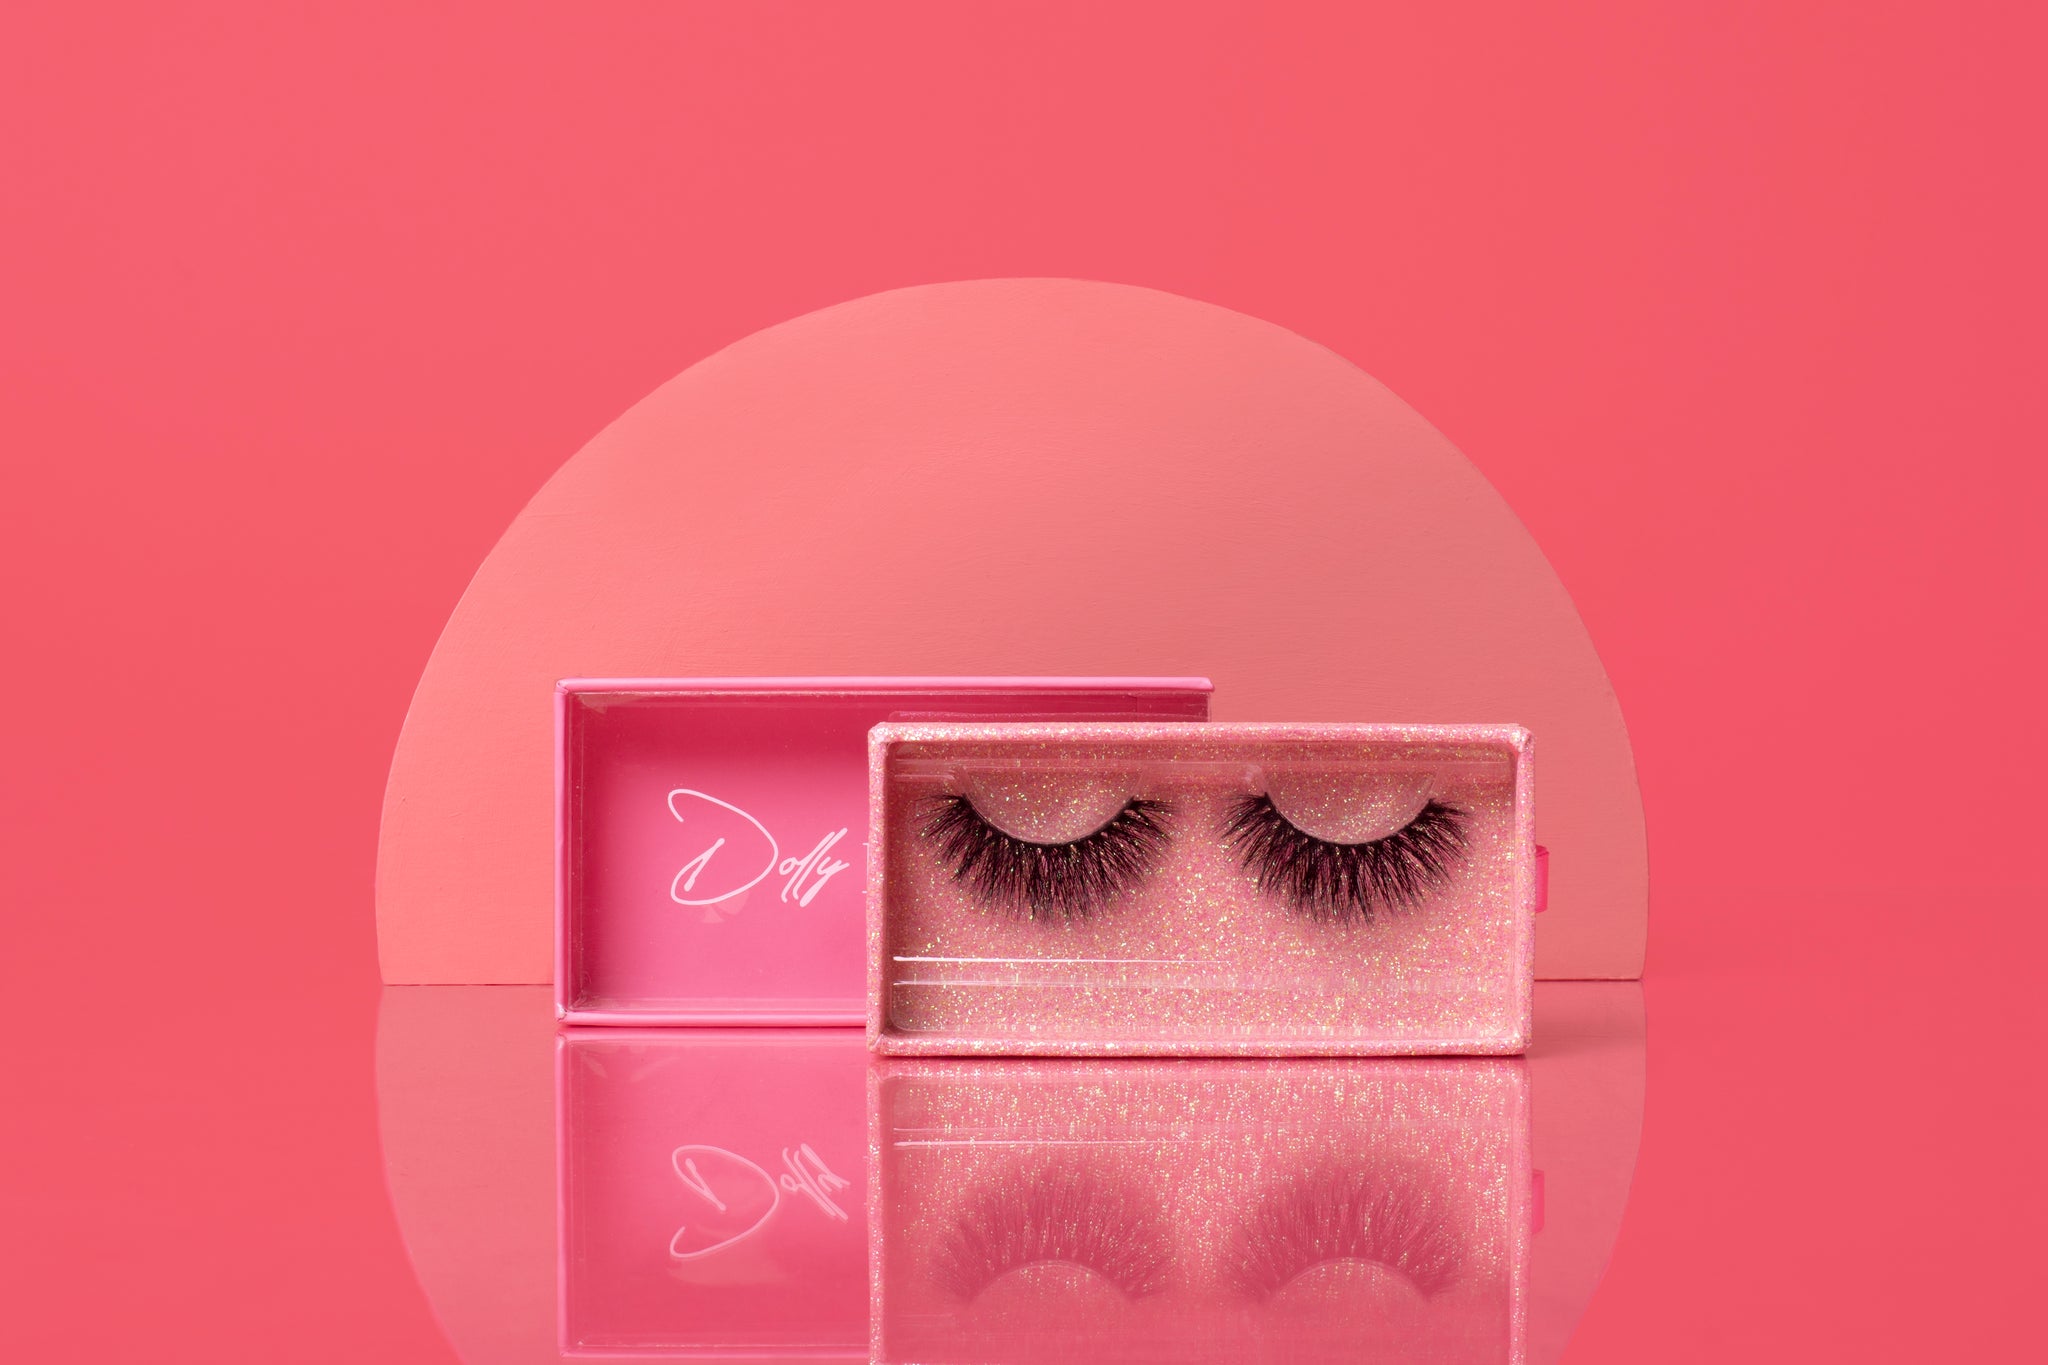 Icy 3D Mink Lashes